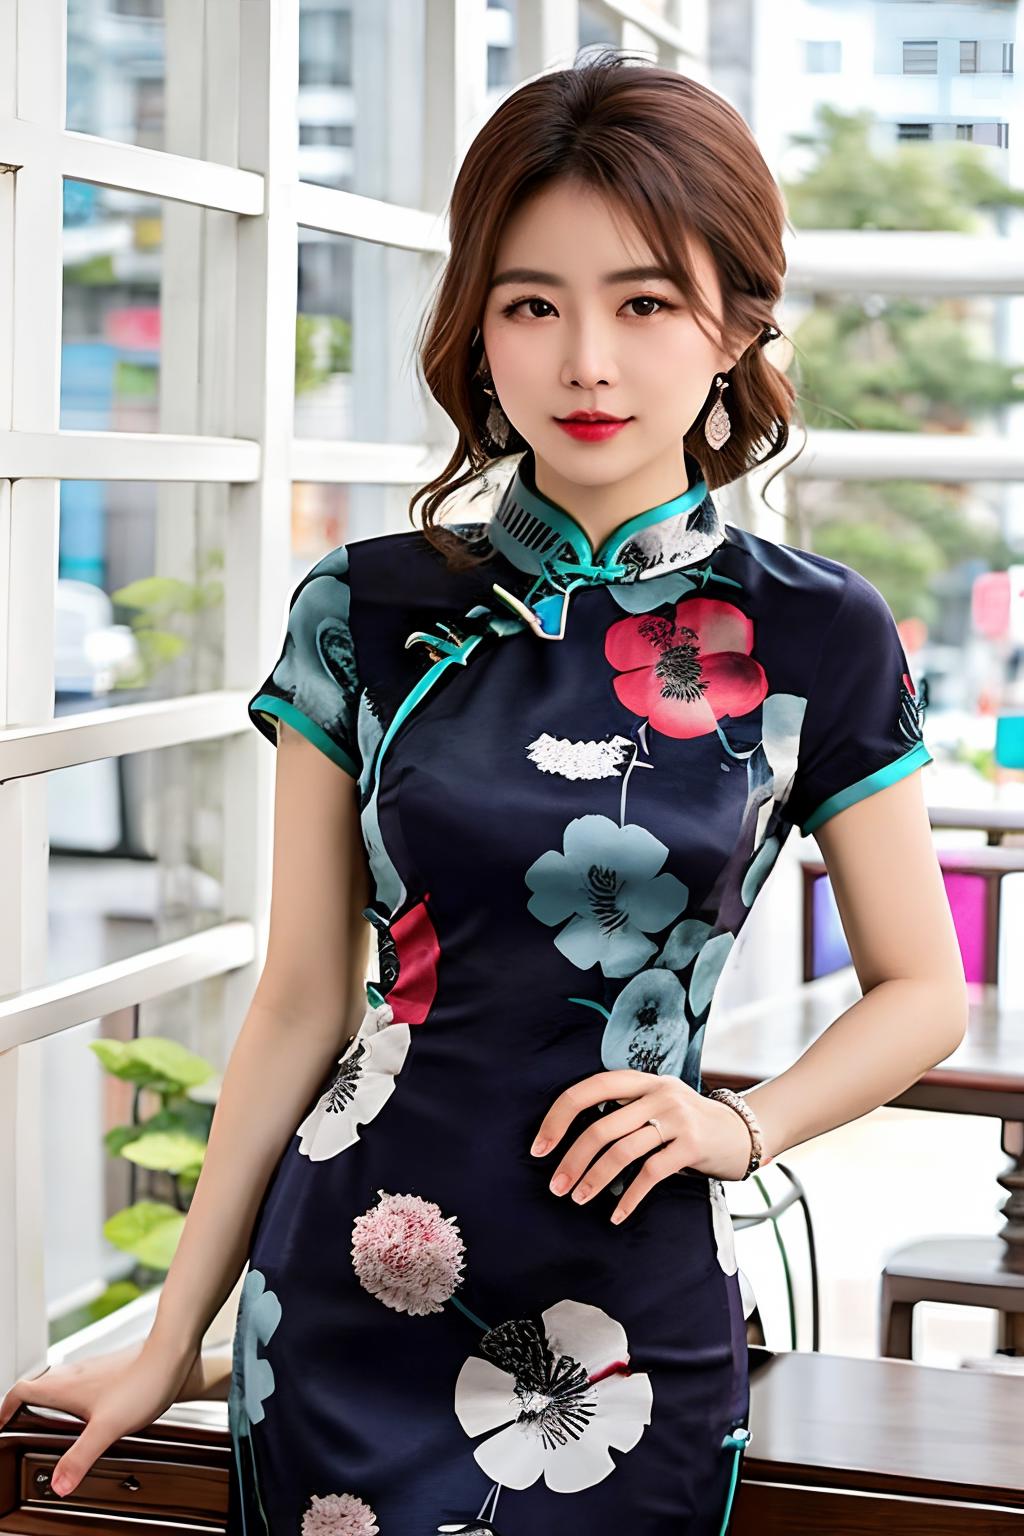 Qipao image by agger